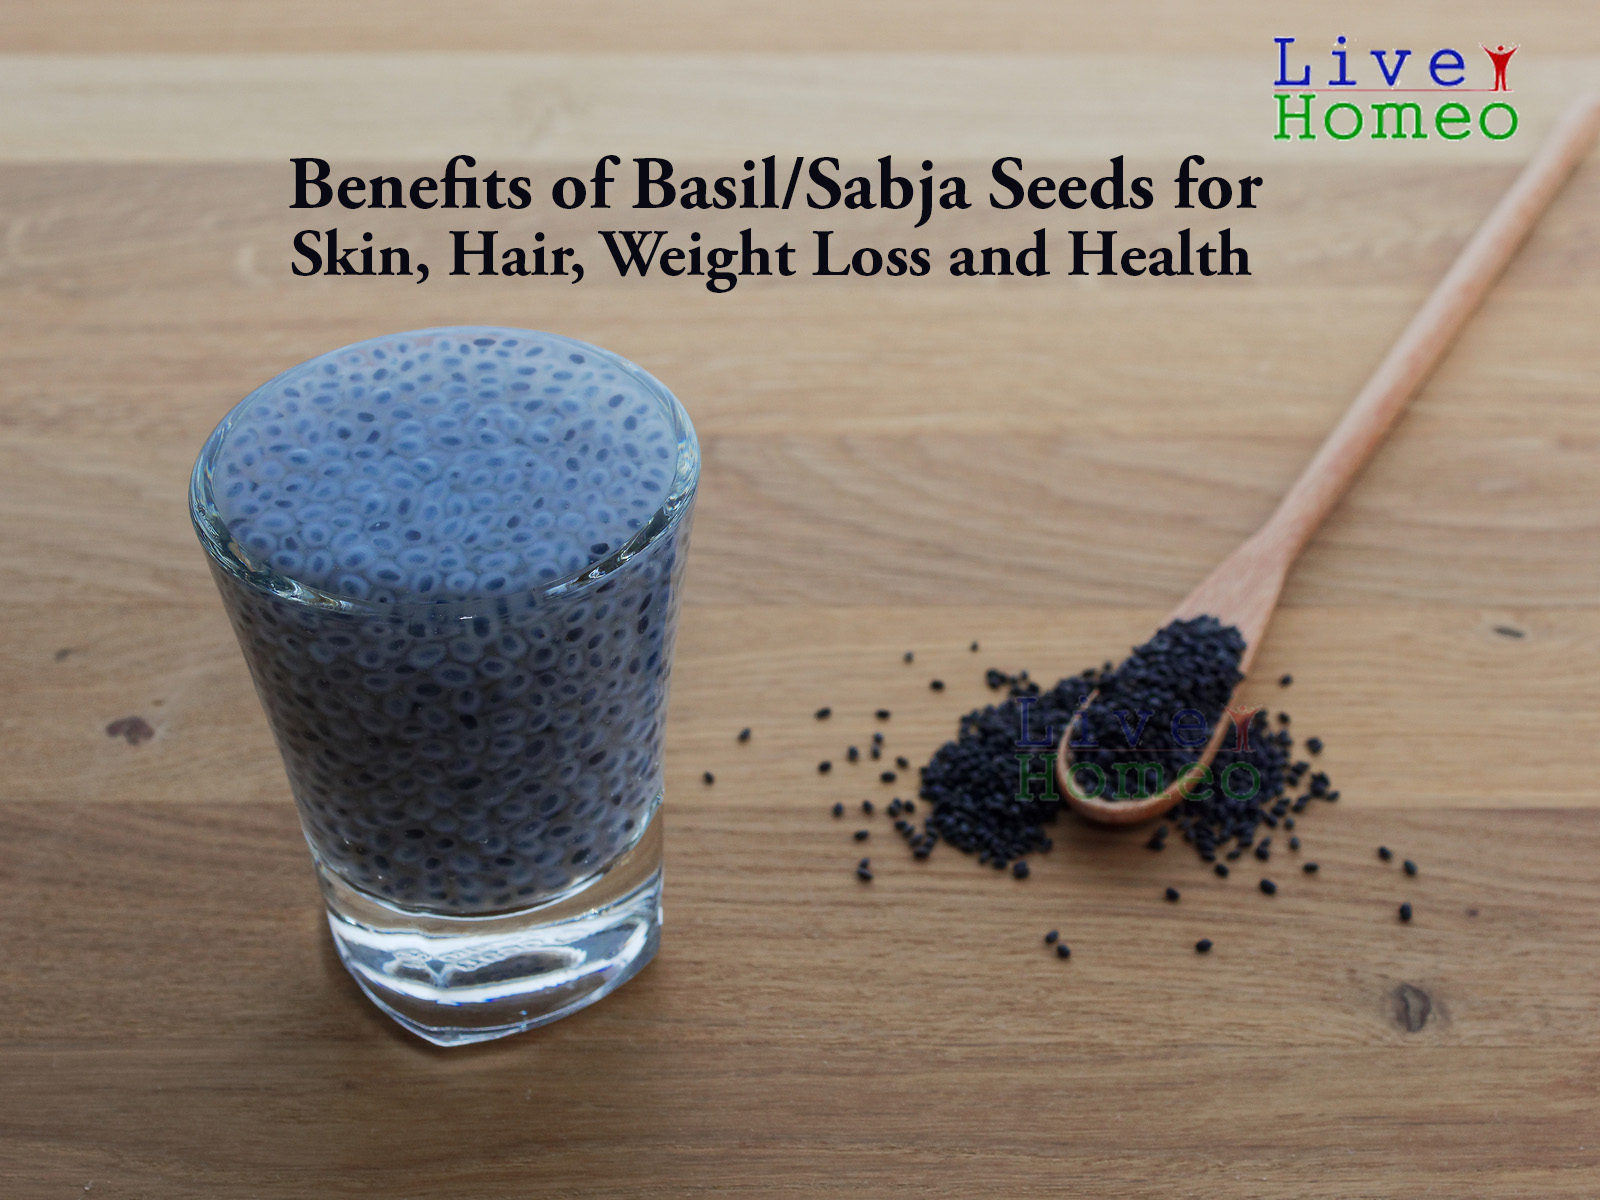 Benefits of Basil or Sabja seeds for skin hair weight loss and health